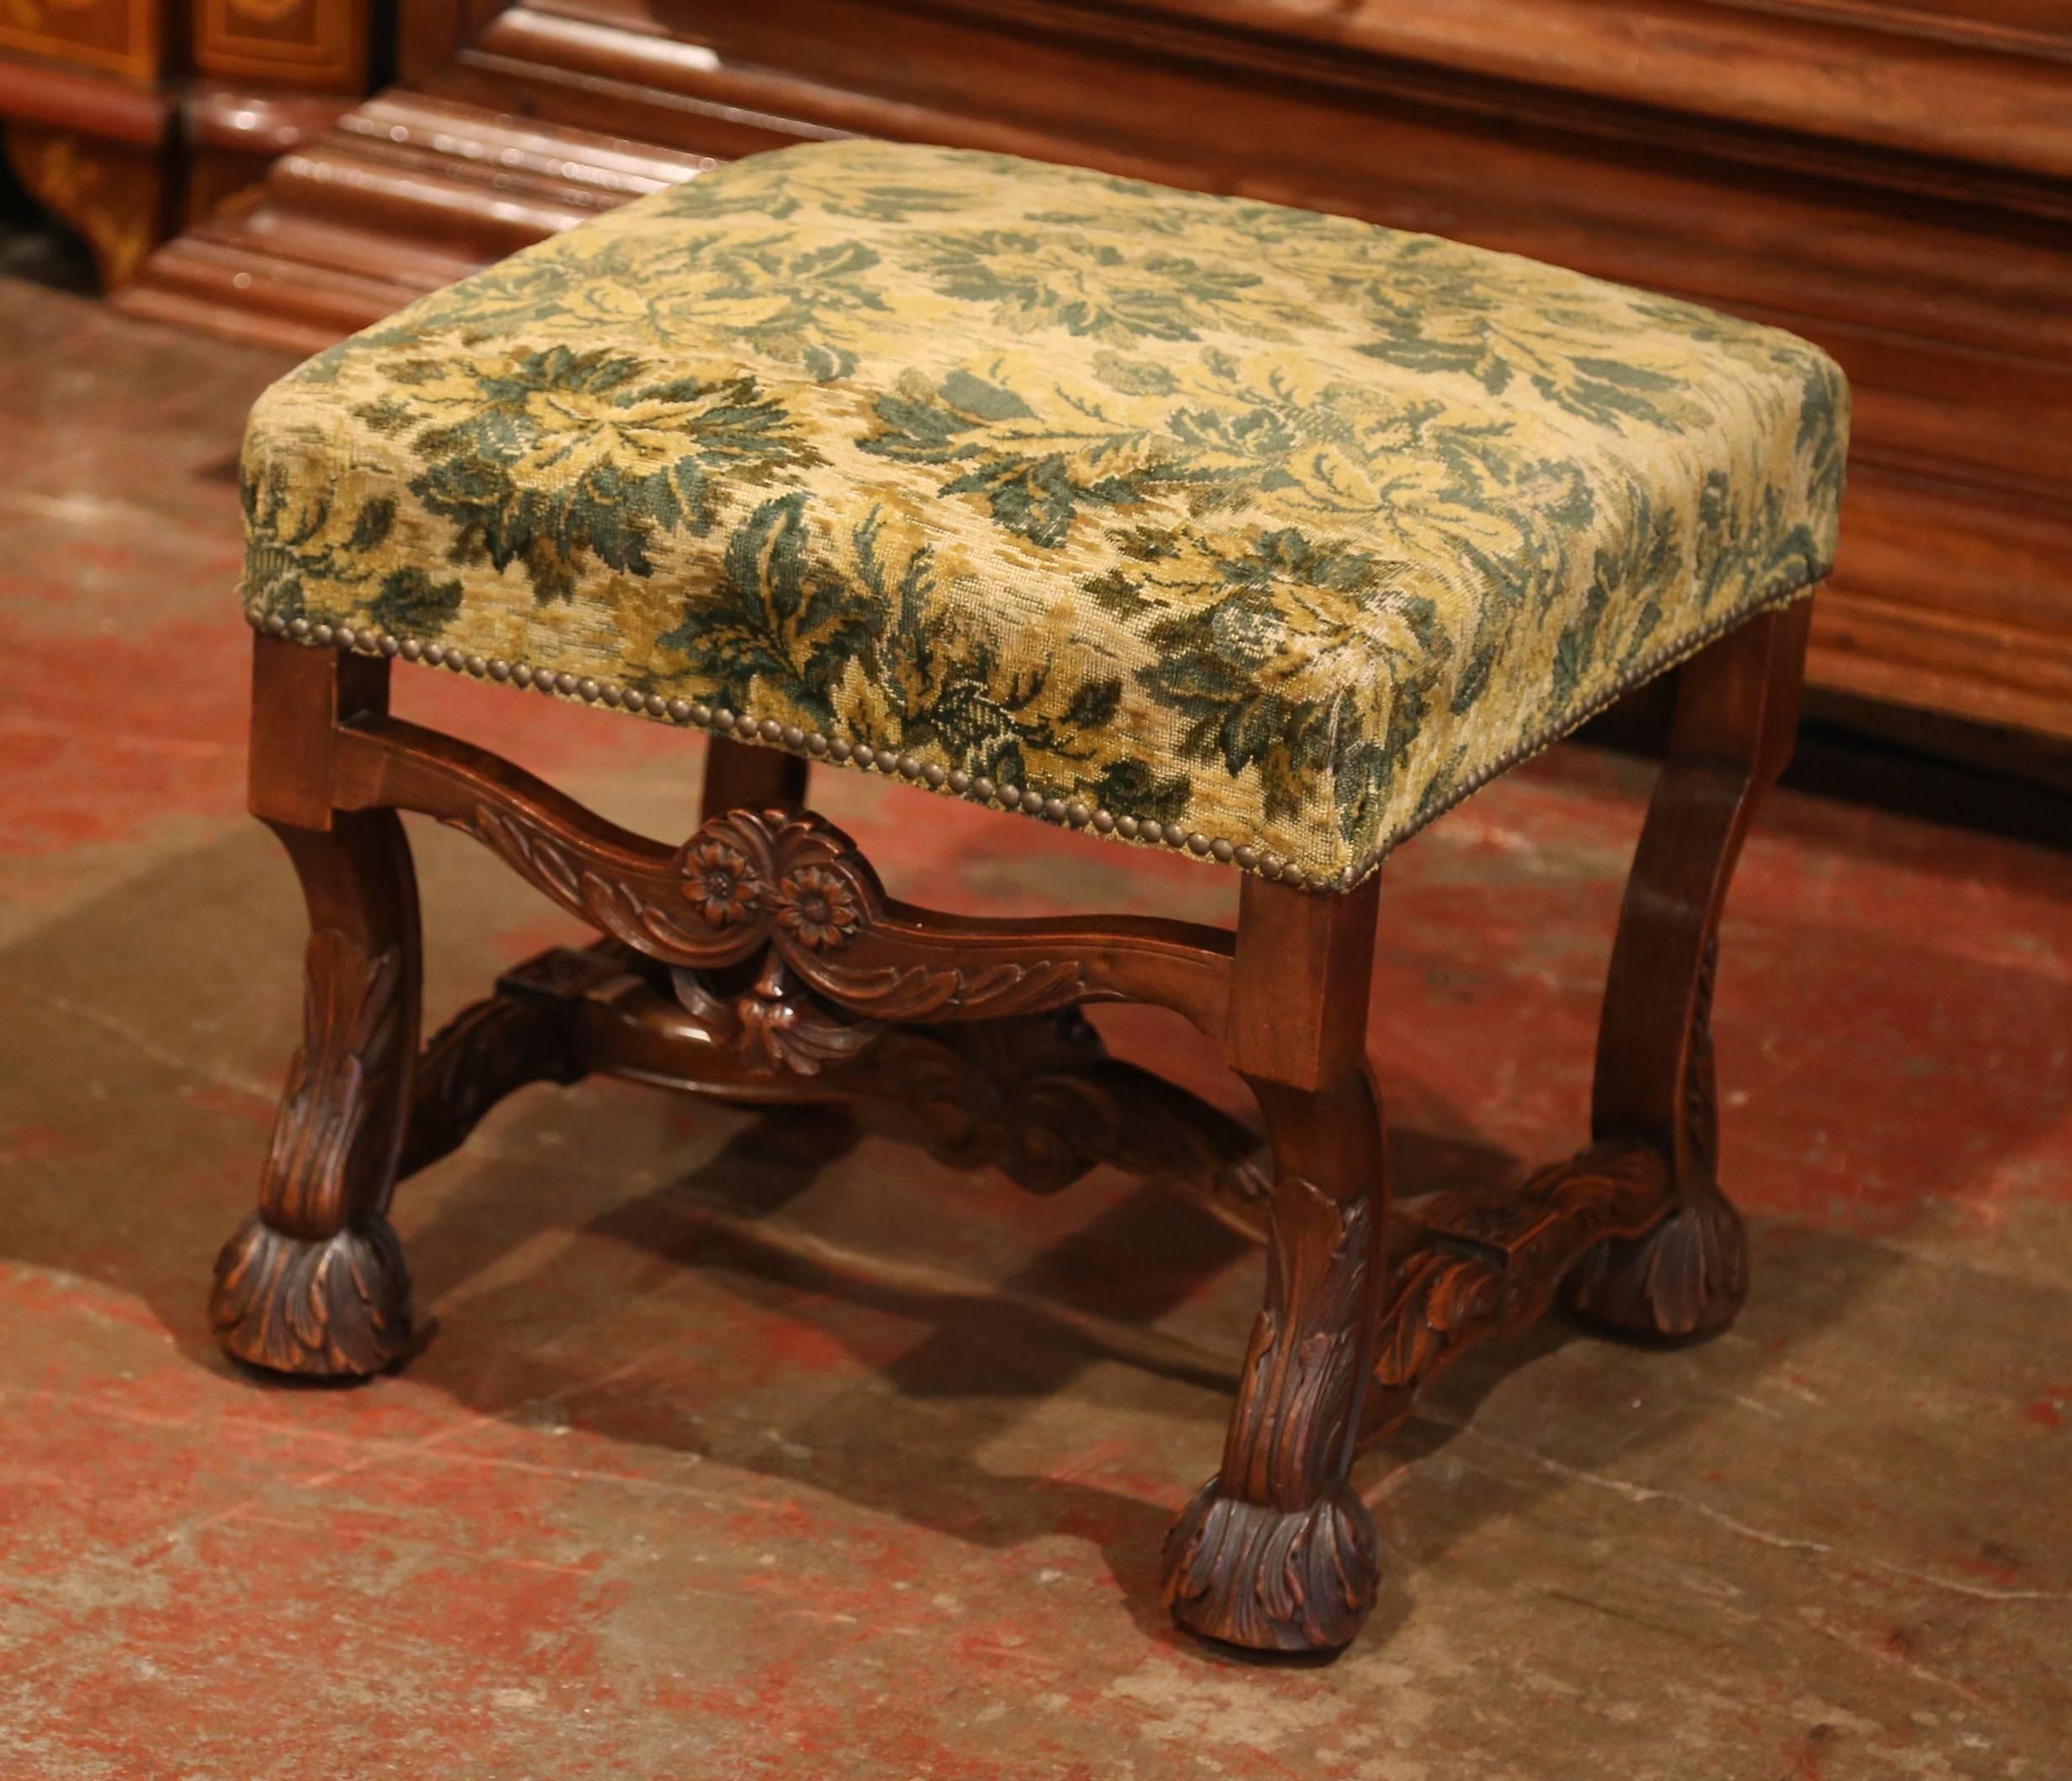 Elegant antique stool from southwest France; crafted circa 1870, the fruit wood stool features four carved scrolled legs with claw feet, acanthus leaves, flowers, and a curved stretcher with center shell. The stool has an old beige and green velvet